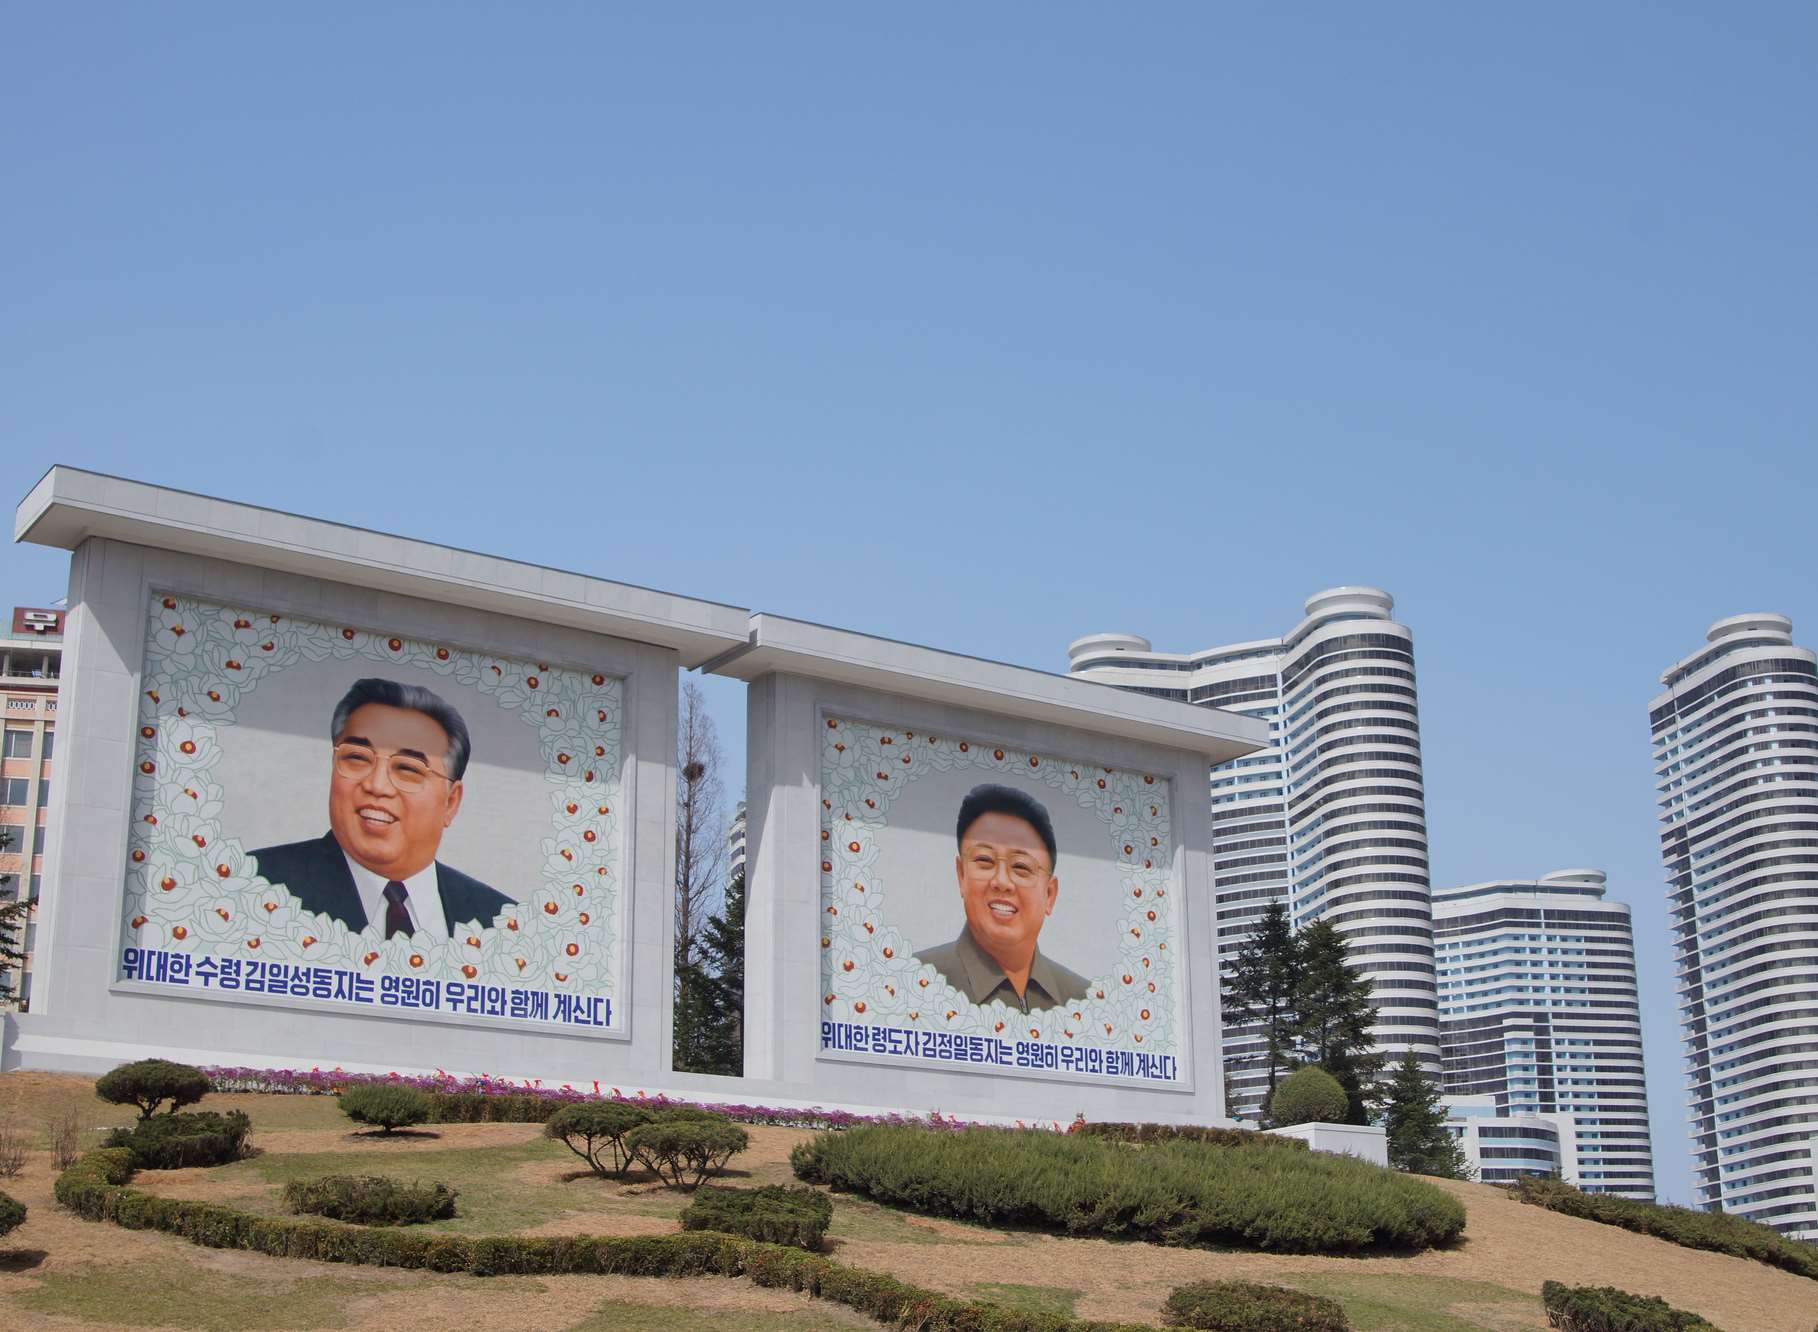 Billboards in support of North Korea's ruling family